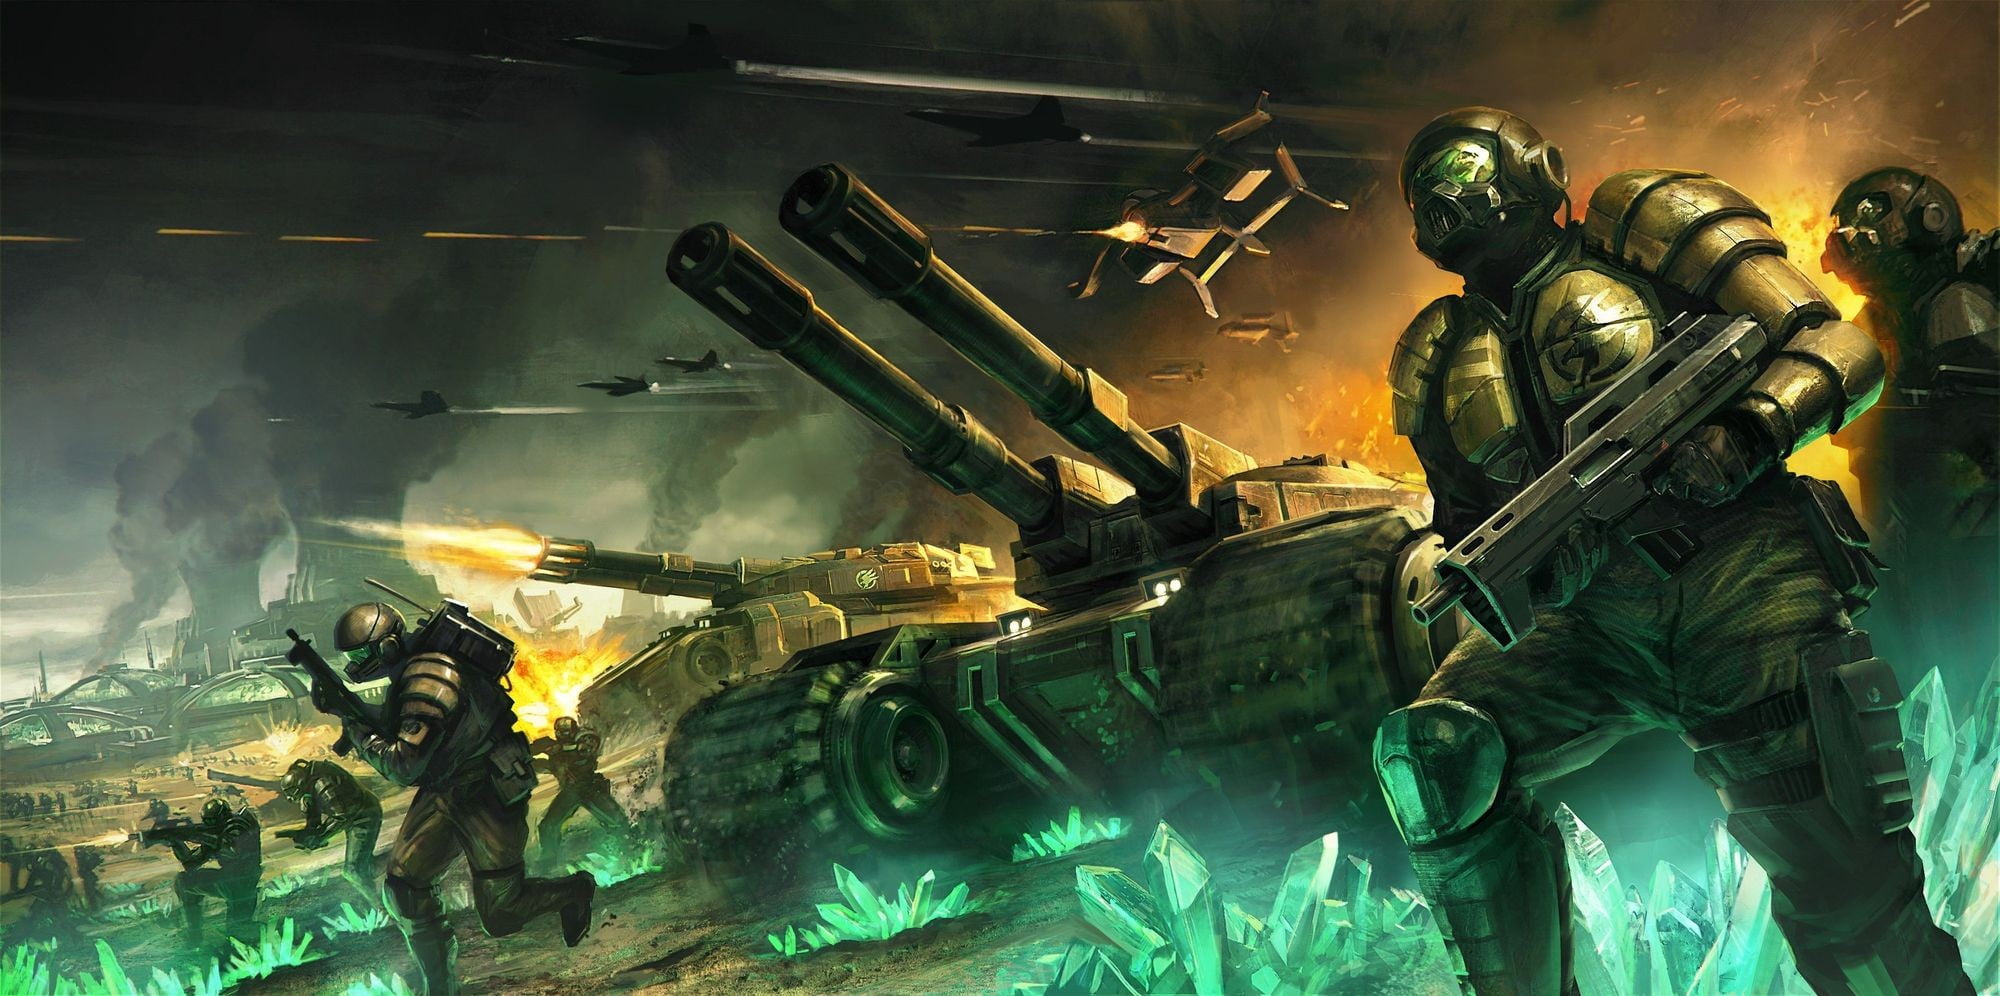 Command them. Command and Conquer 3 Tiberium Wars Art. Command and Conquer 3 Tiberium Wars арт. Спецназ ГСБ Command Conquer. Command and Conquer Tiberium Wars арт.